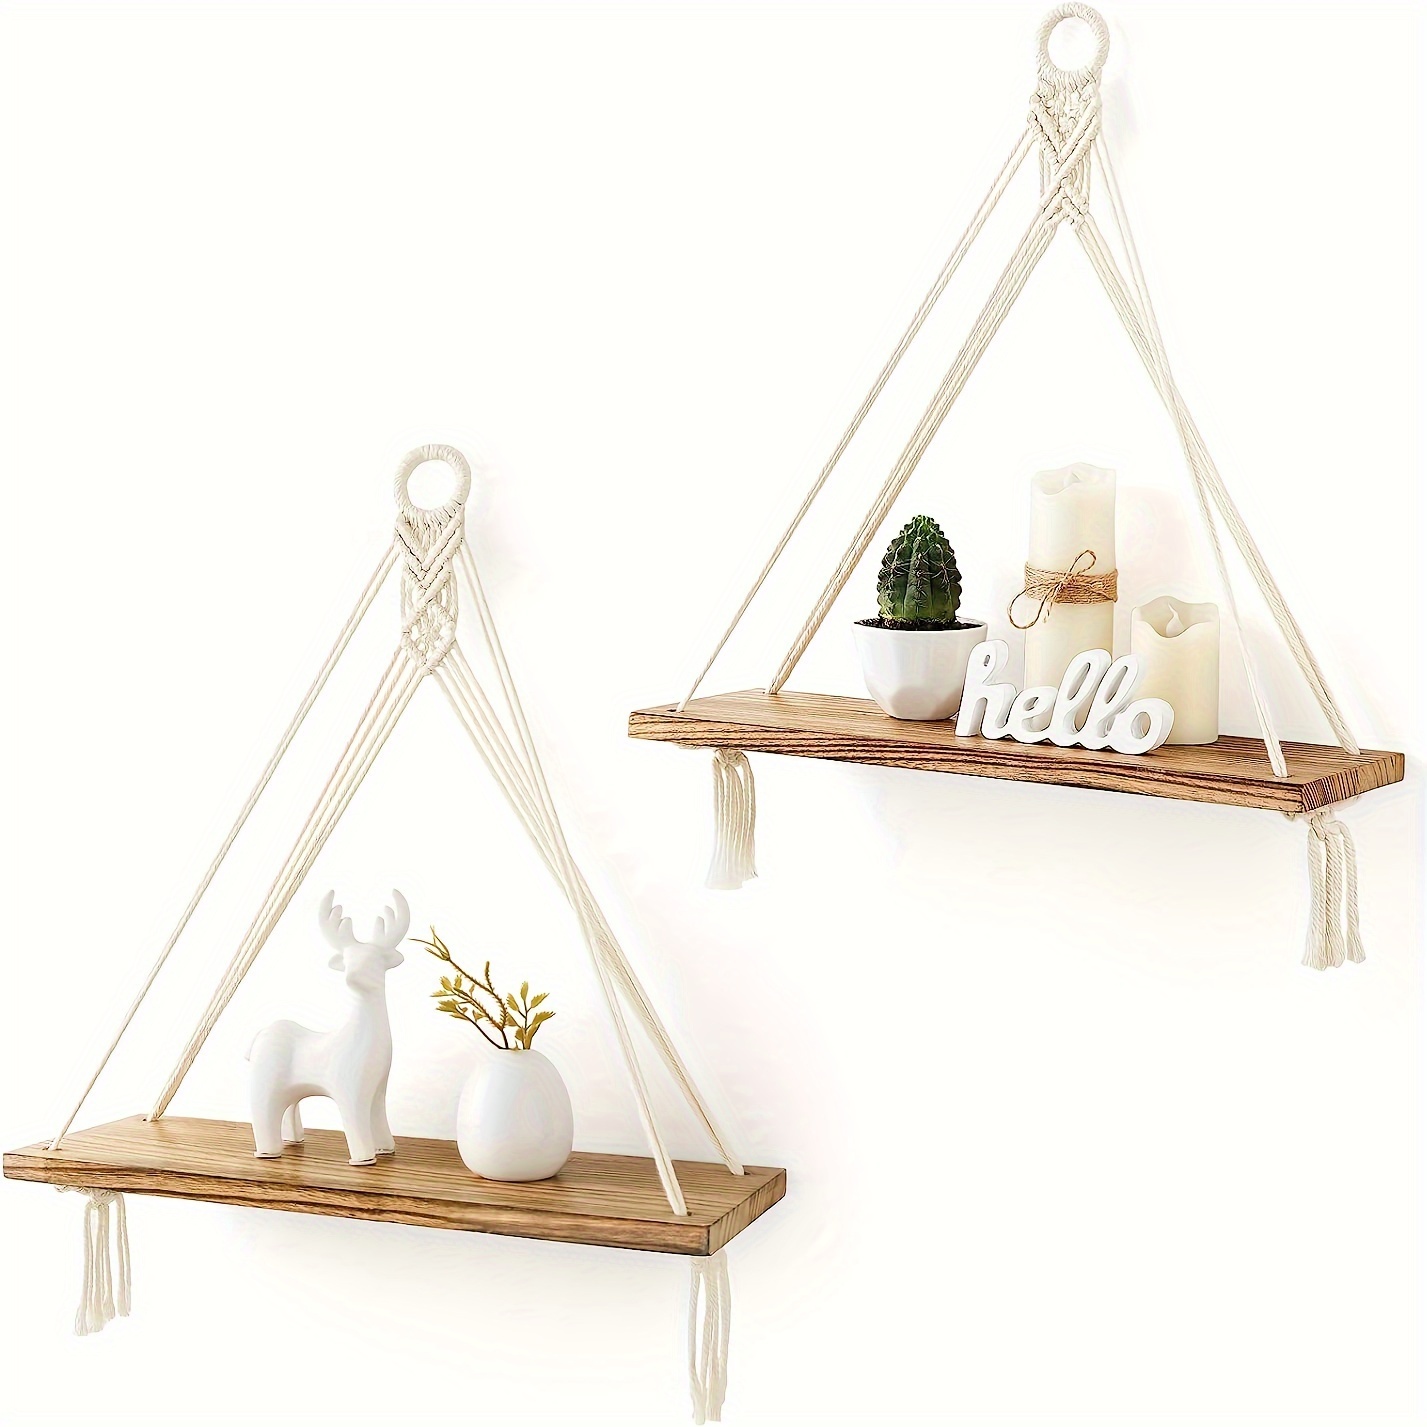 

2-pack Boho Macrame Hanging Shelves - Fabric Wall Hanging Floating Wood Shelves For Storage And Display In Bedroom, Living Room, Nursery, Dorm - Versatile Wall Mounted Rope Shelf For Plants, Photos